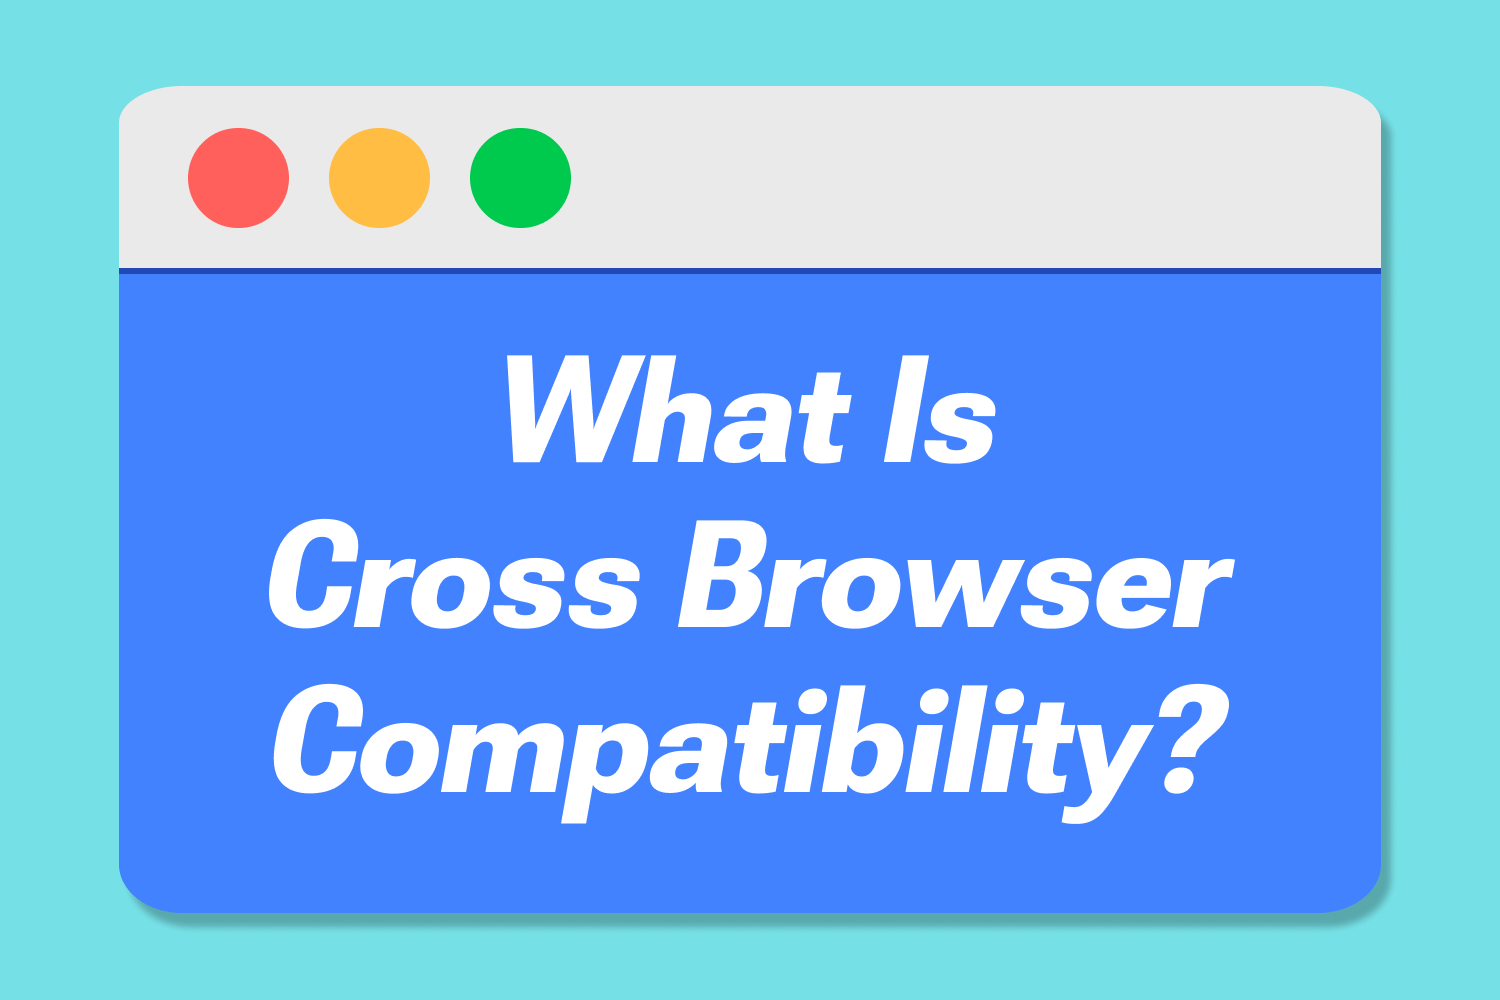 What Is Cross Browser Compatibility?